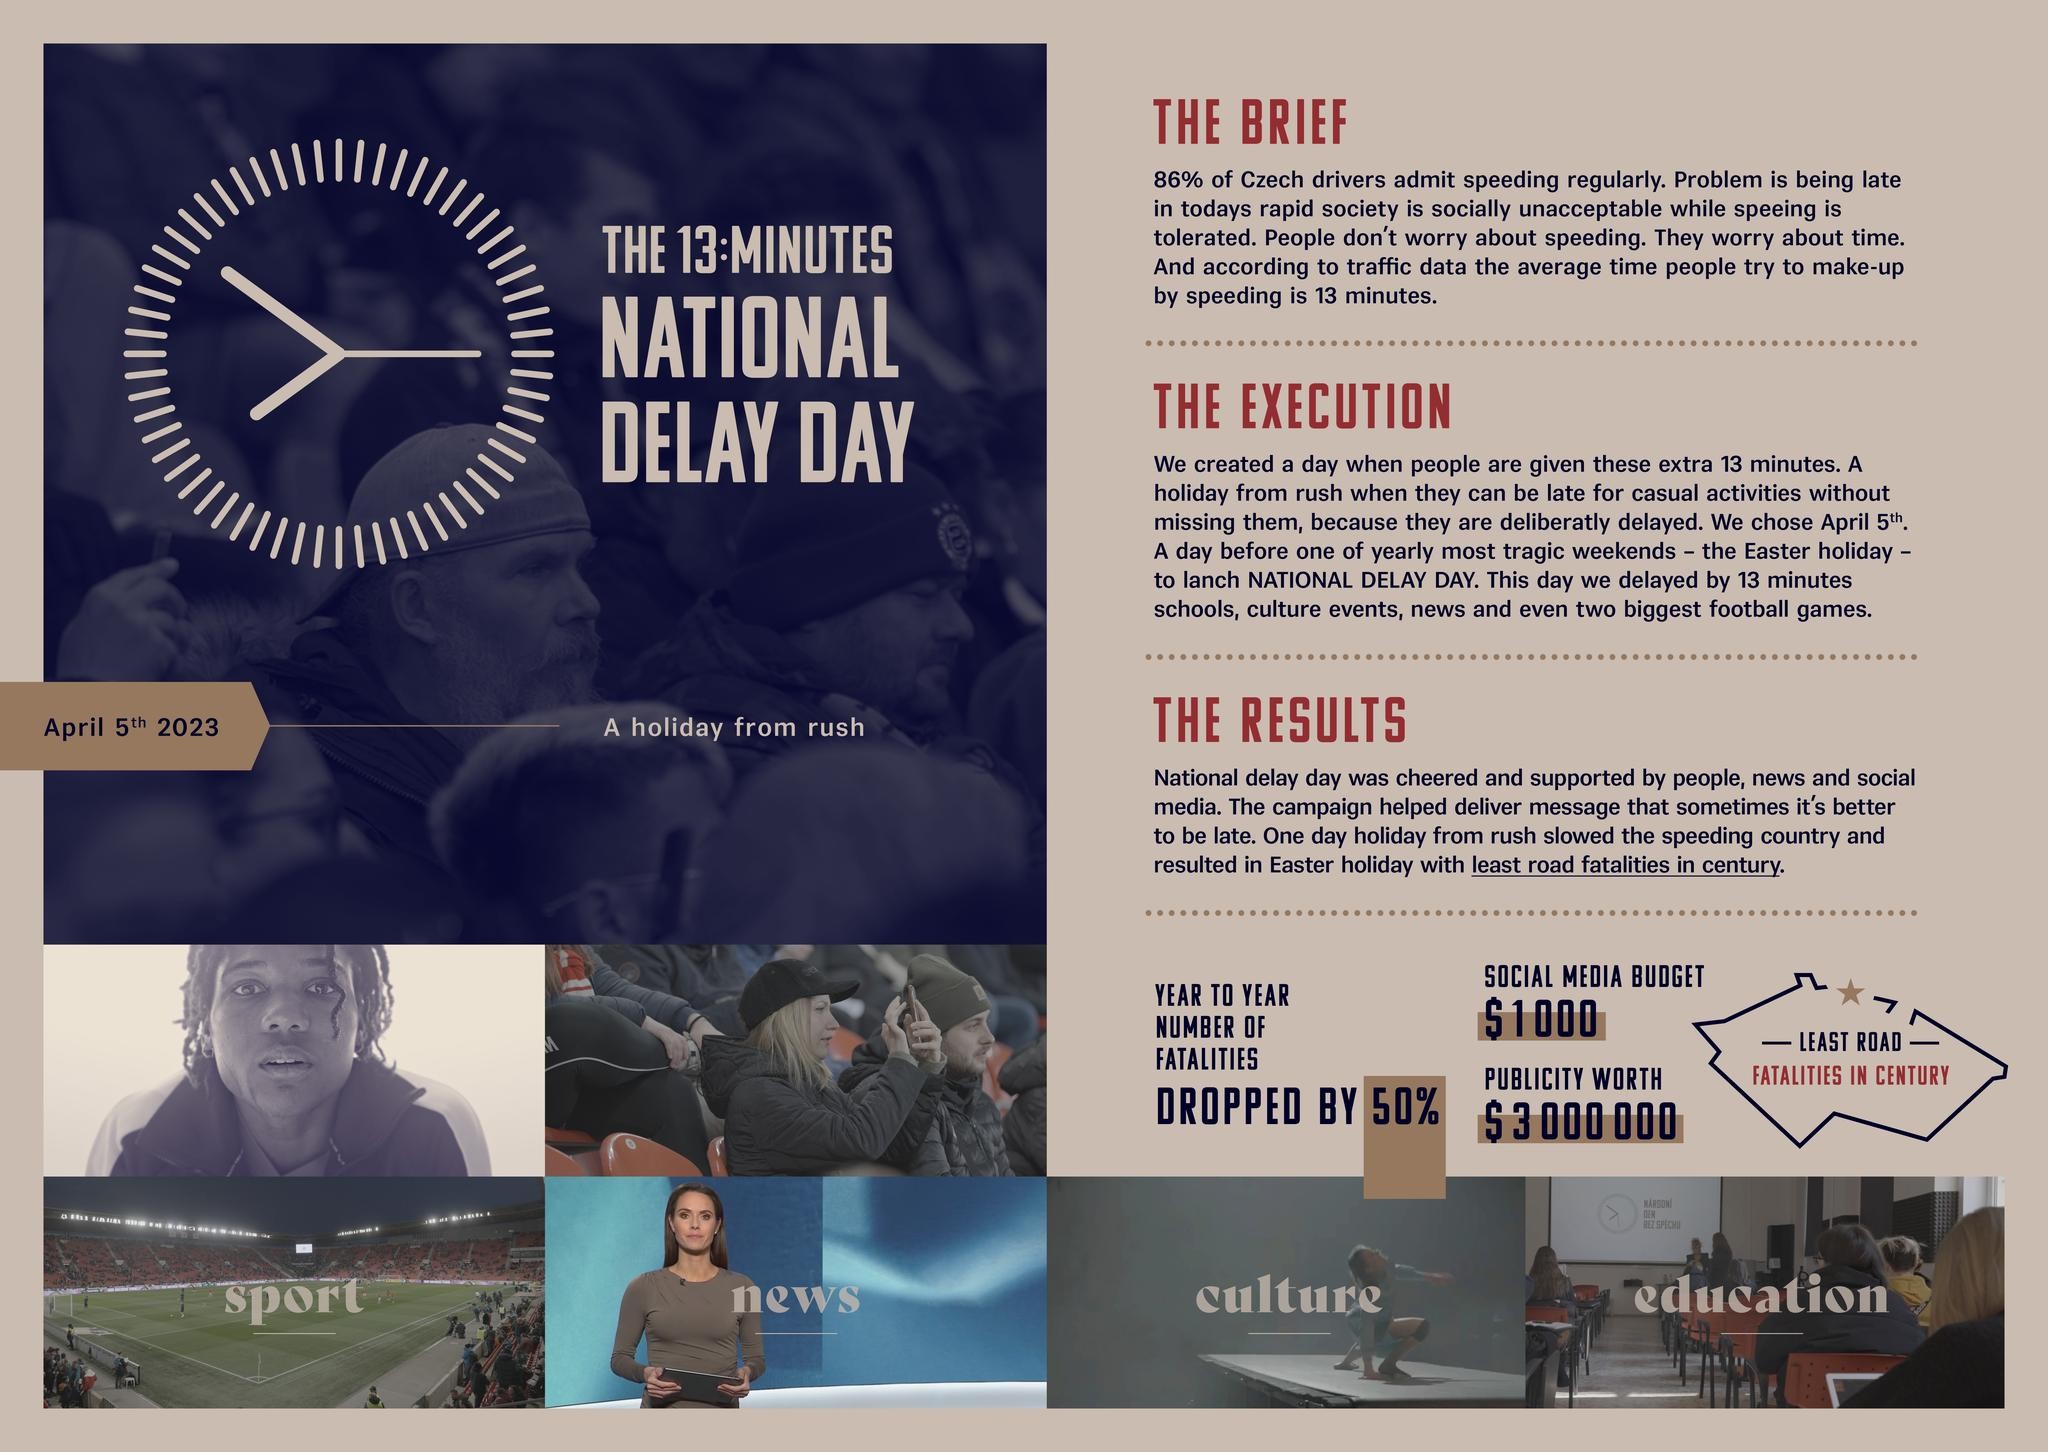 THE 13 MINUTES NATIONAL DELAY DAY